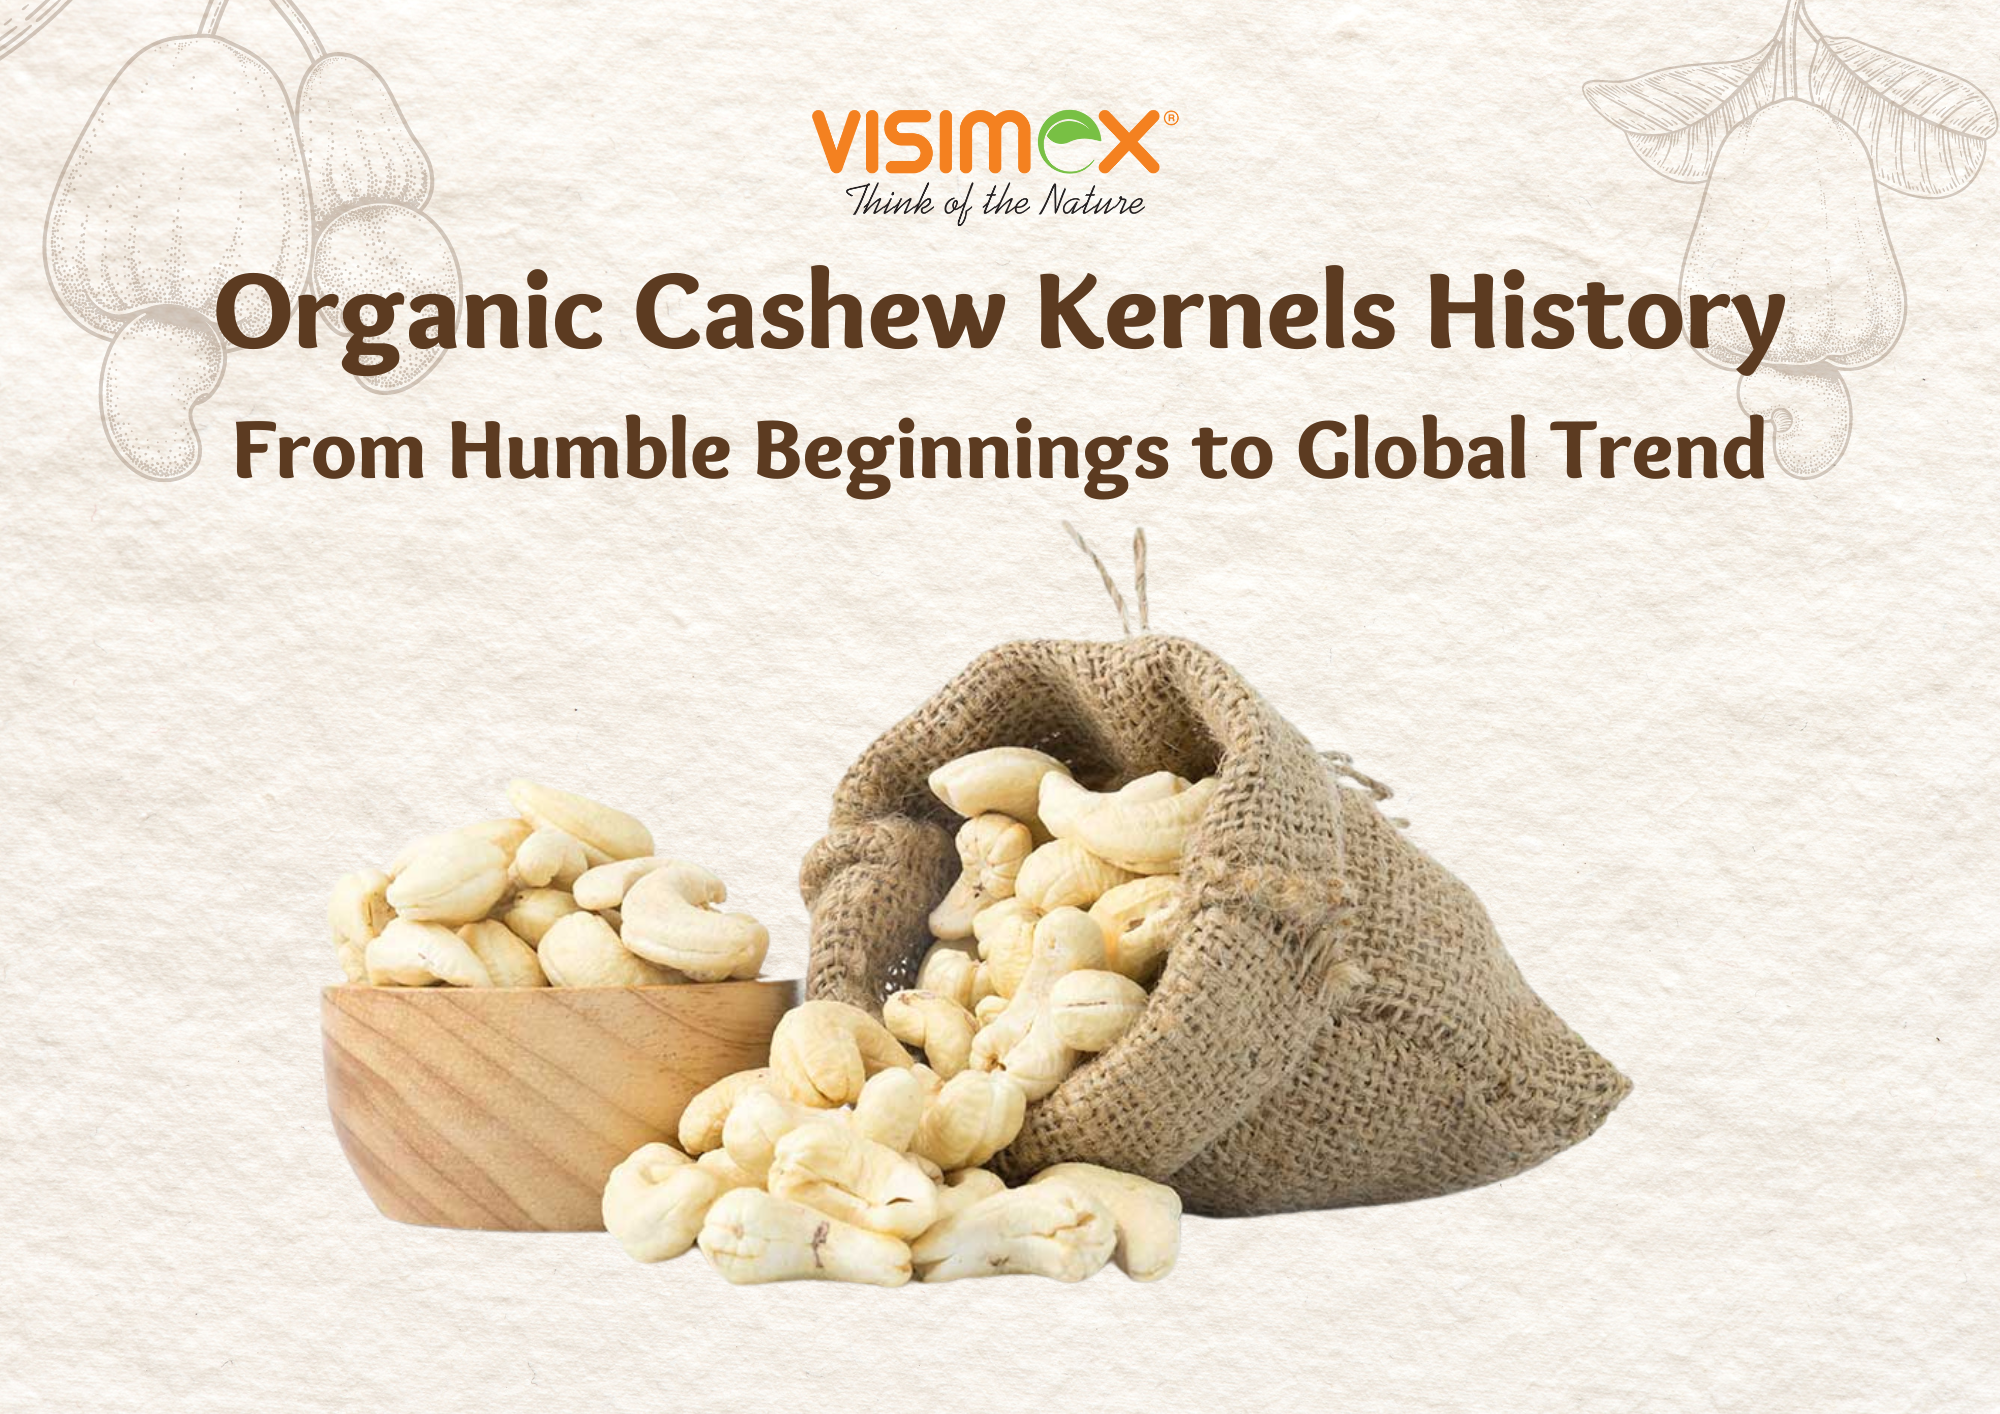 Organic Cashew Kernels History: From Humble Beginnings to Global Trend